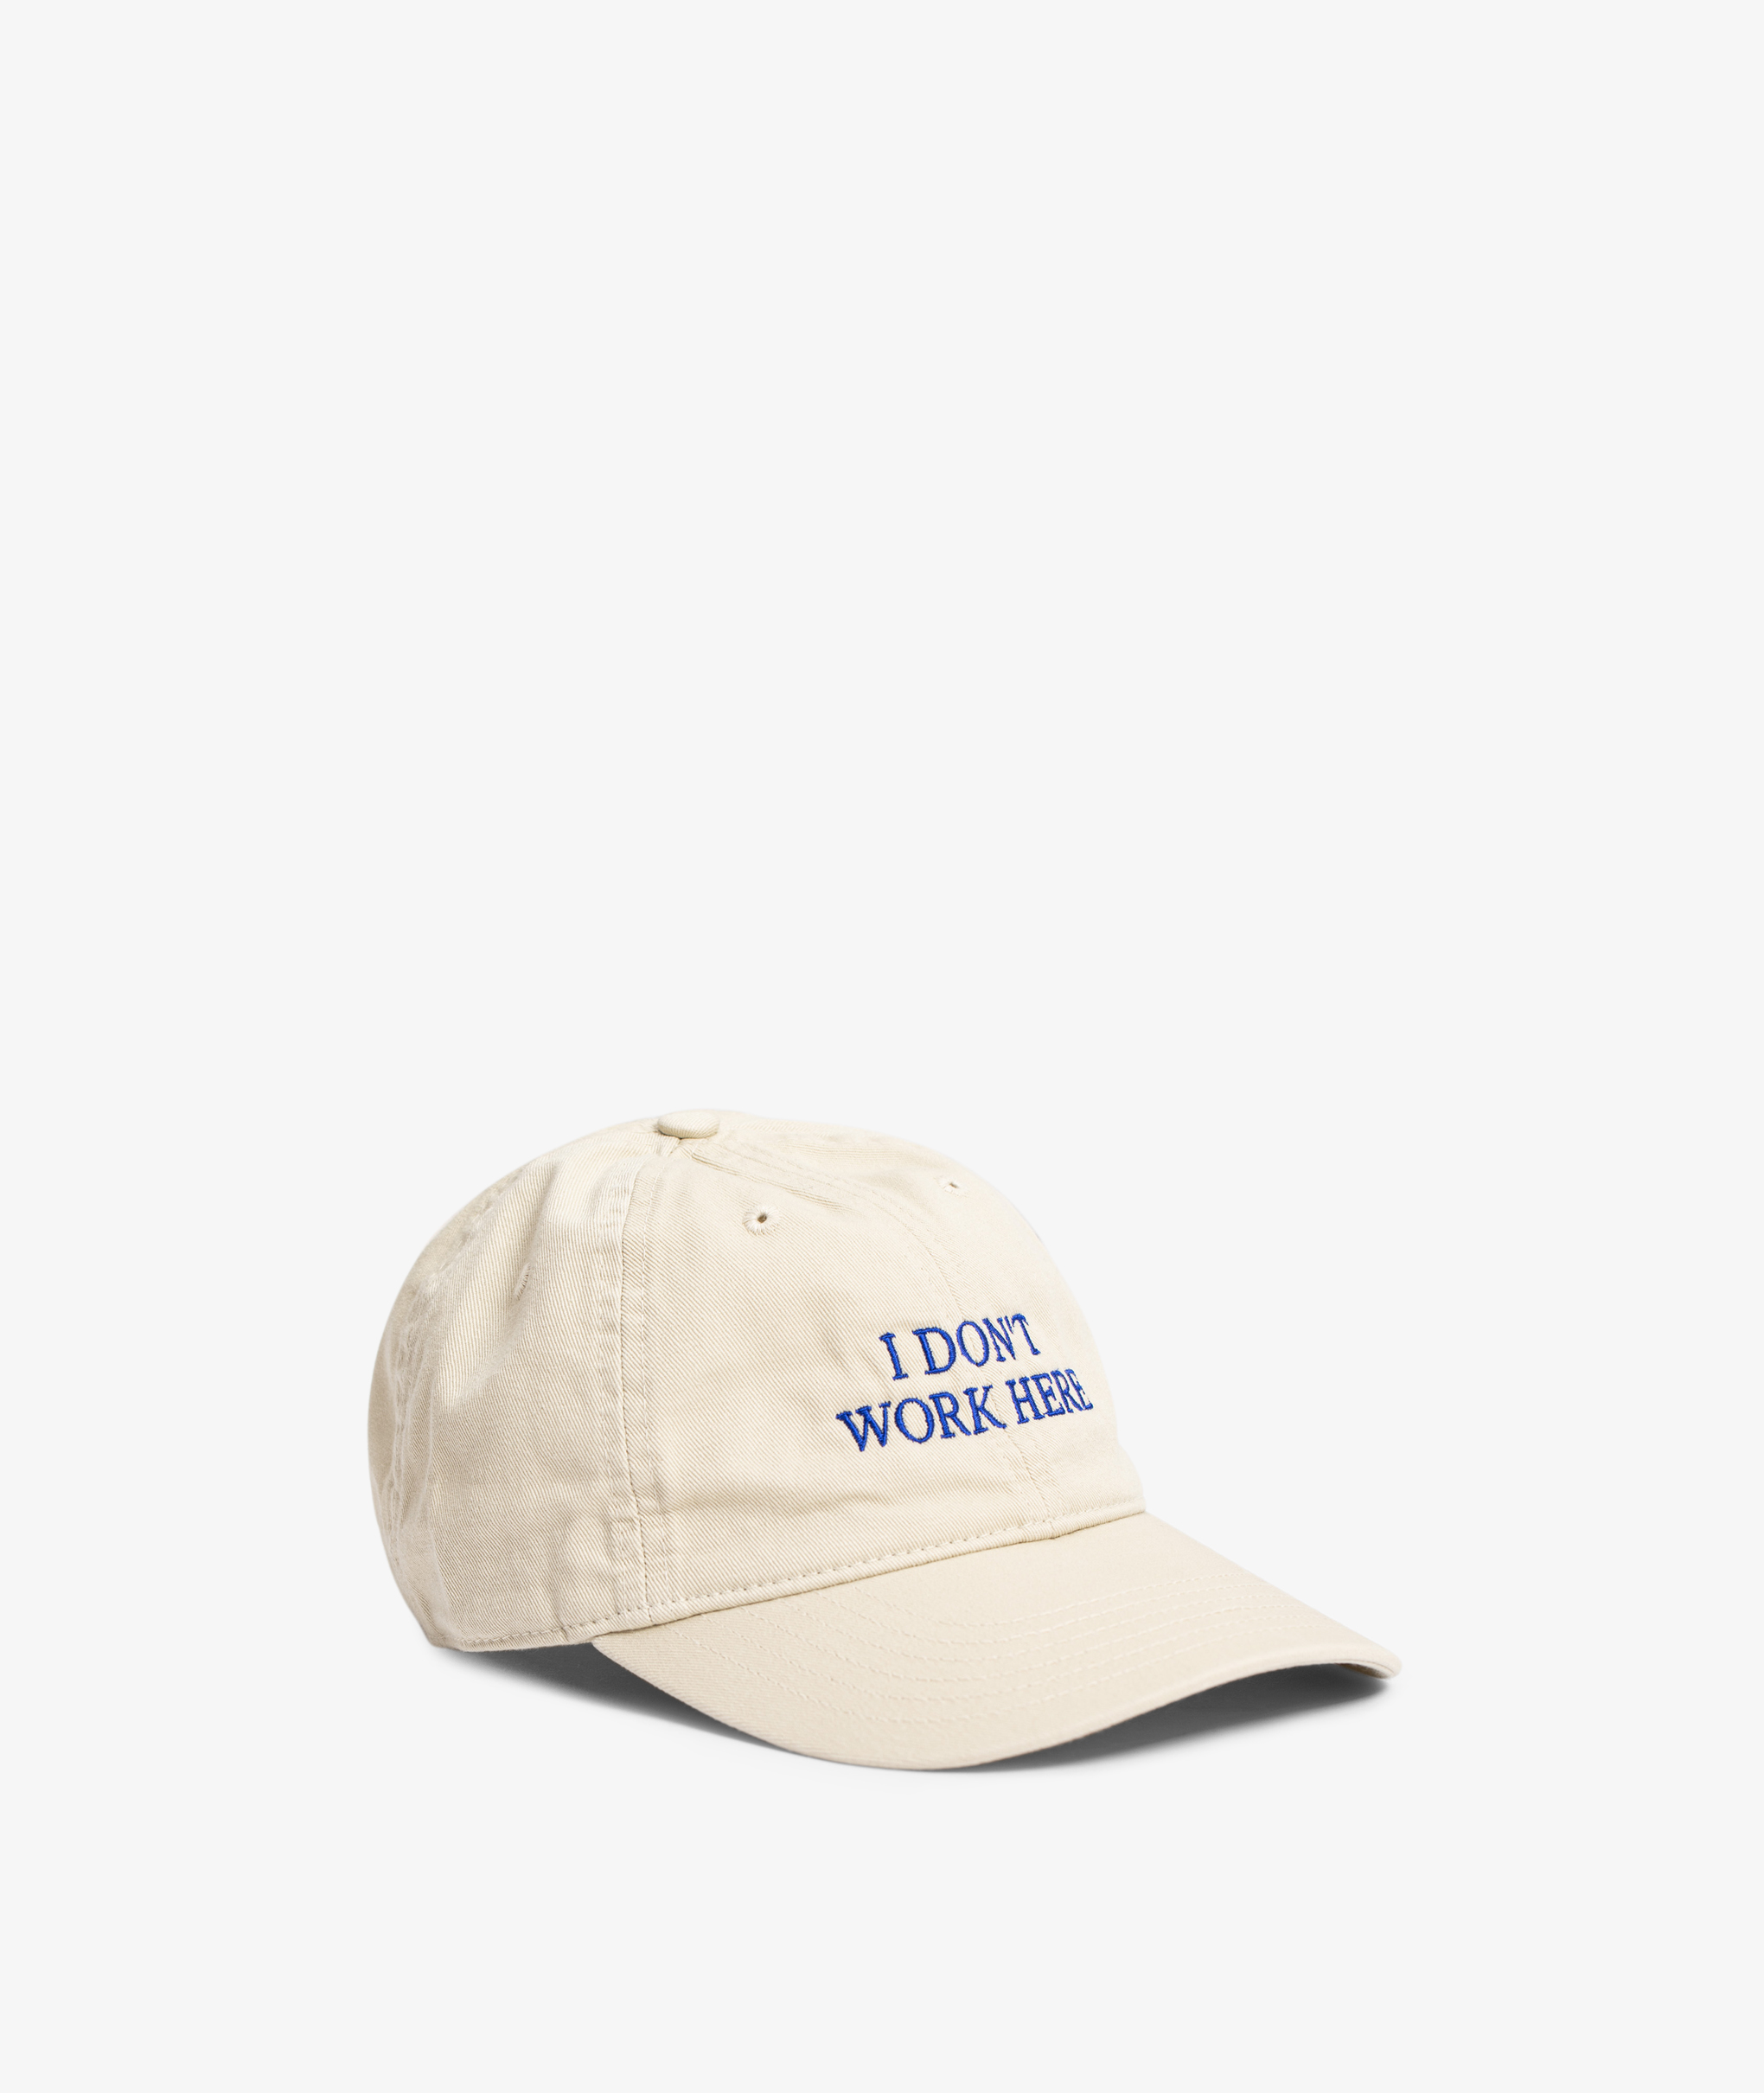 Norse Store | Shipping Worldwide - IDEA I don't Work here Cap - Beige